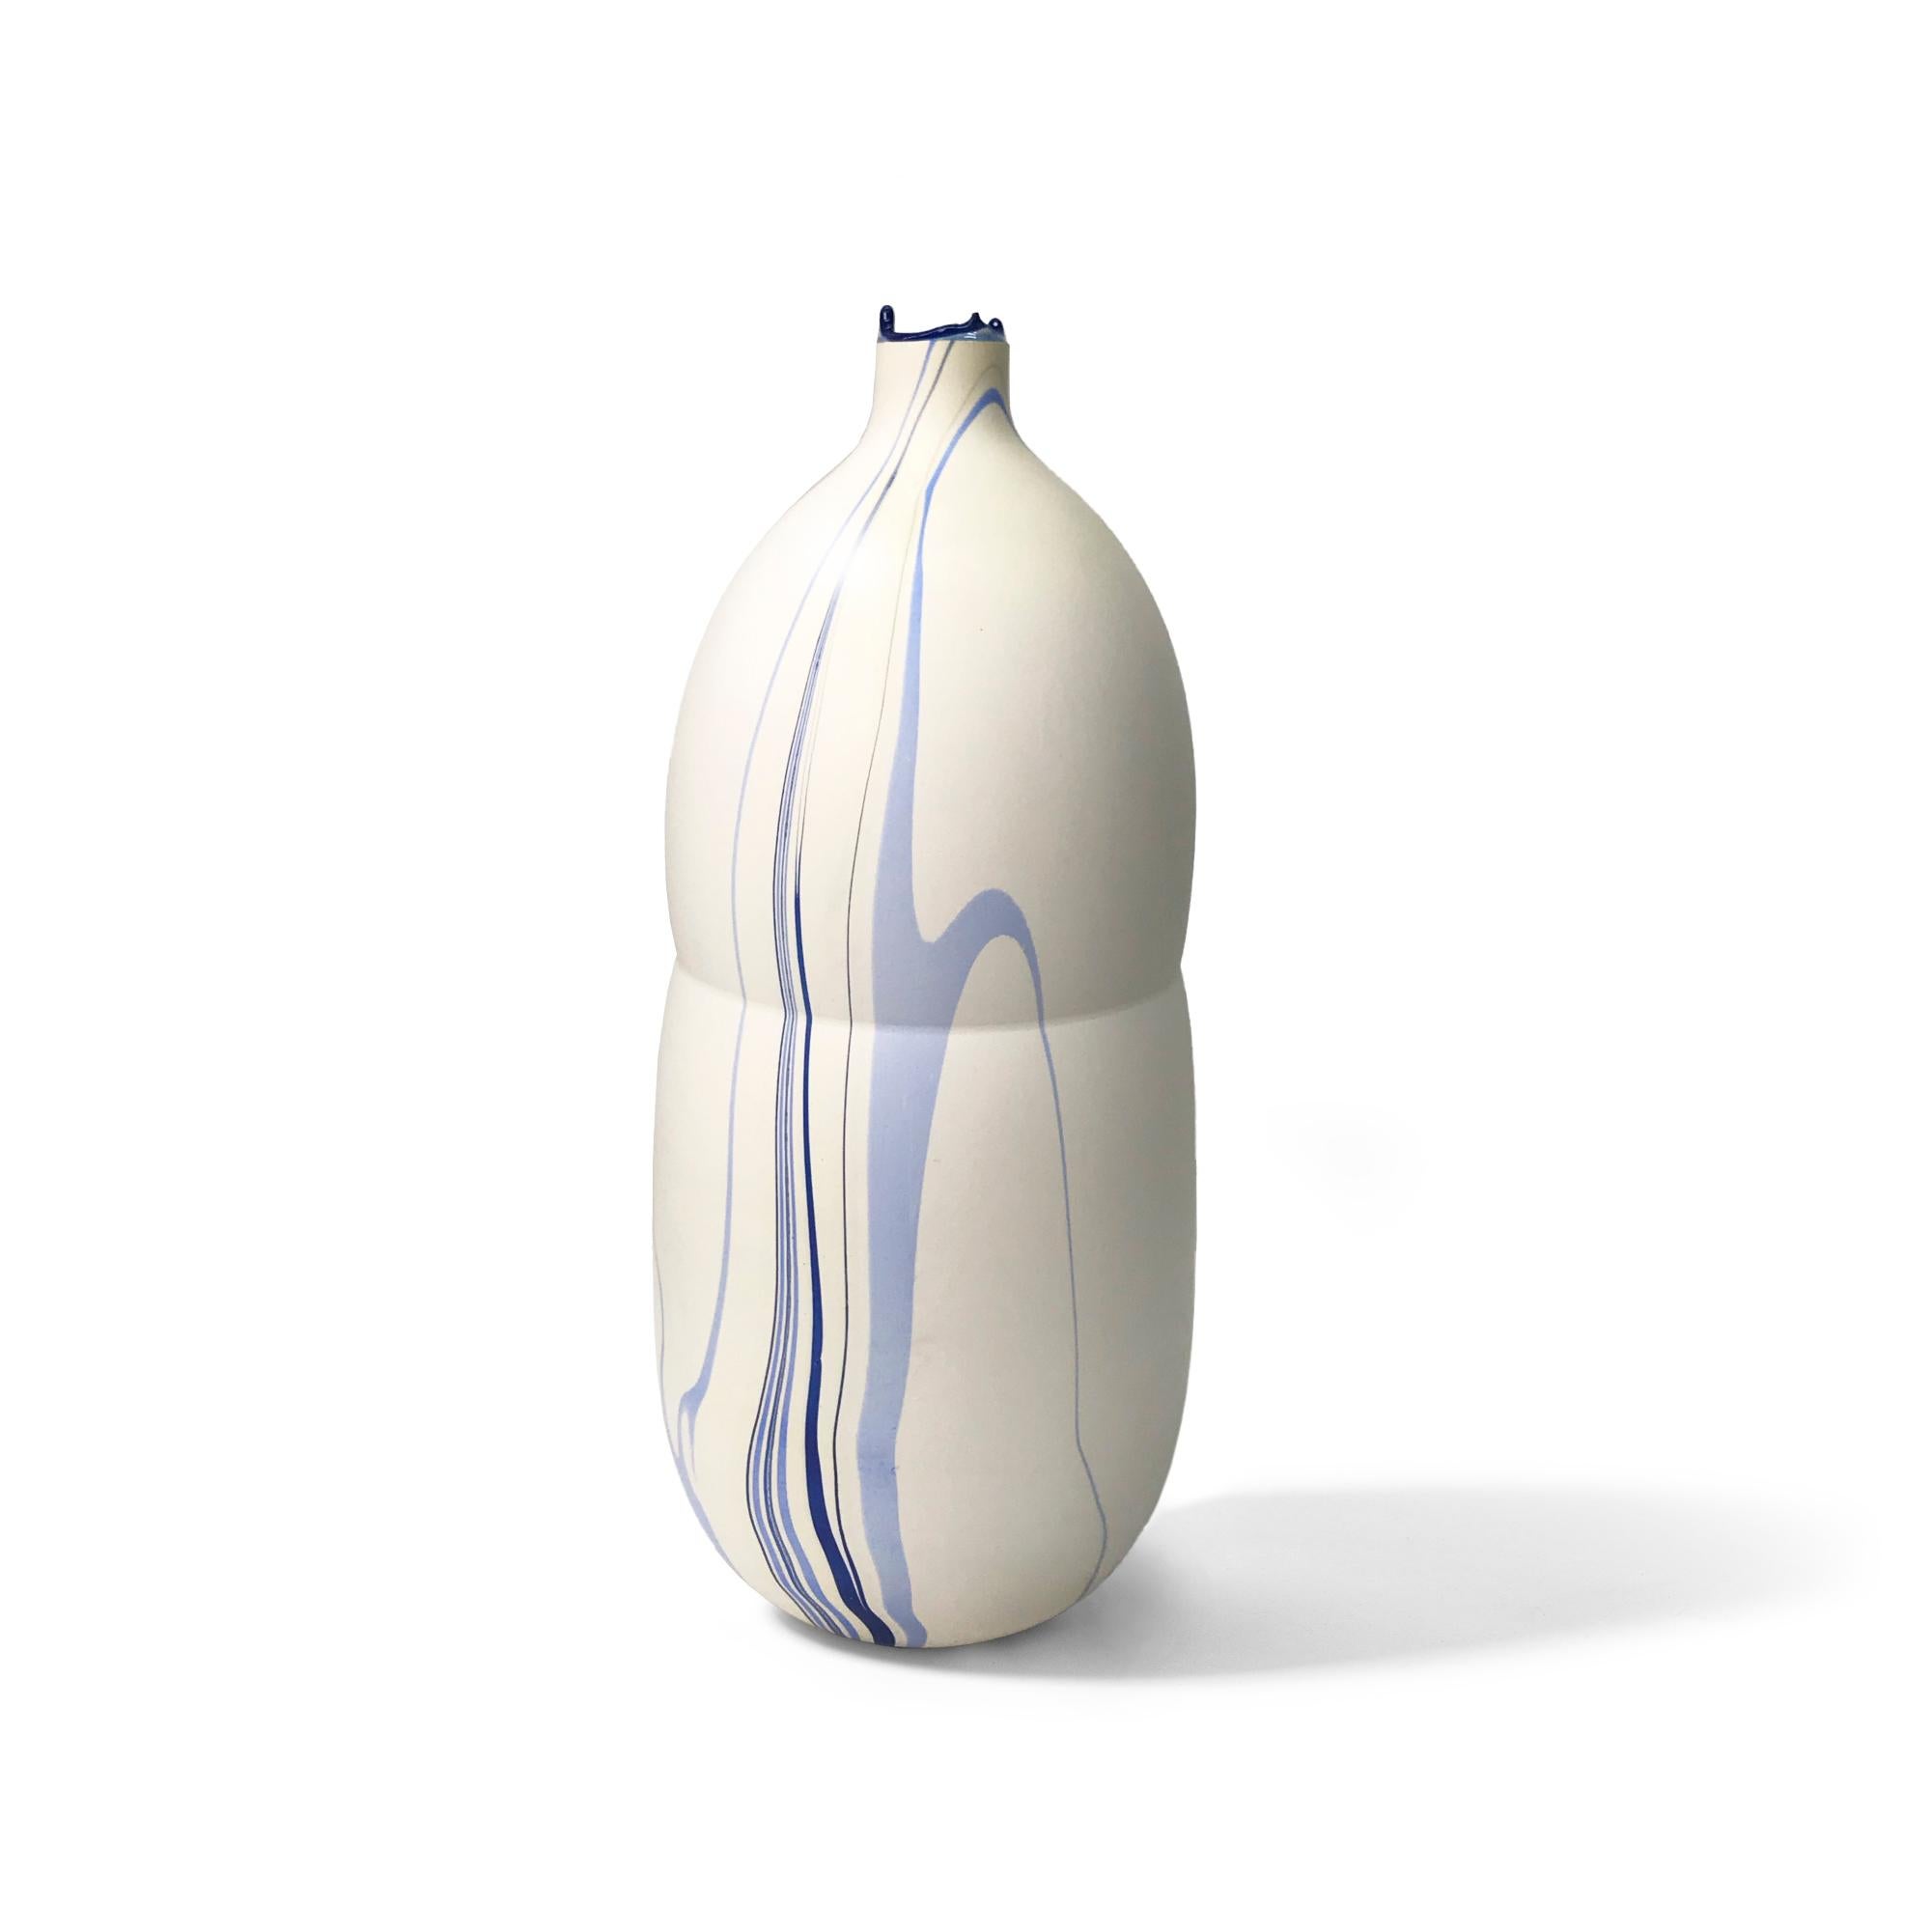 Mimas Hourglass Hydro Vase by Elyse Graham
Dimensions: W 14 x D 14 x H 29 cm
Materials: Plaster, Resin
MOLDED, DYED, AND FINISHED BY HAND IN LA. CUSTOMIZATION
AVAILABLE.
ALL PIECES ARE MADE TO ORDER

Our new Hydro Vases take on a futuristic